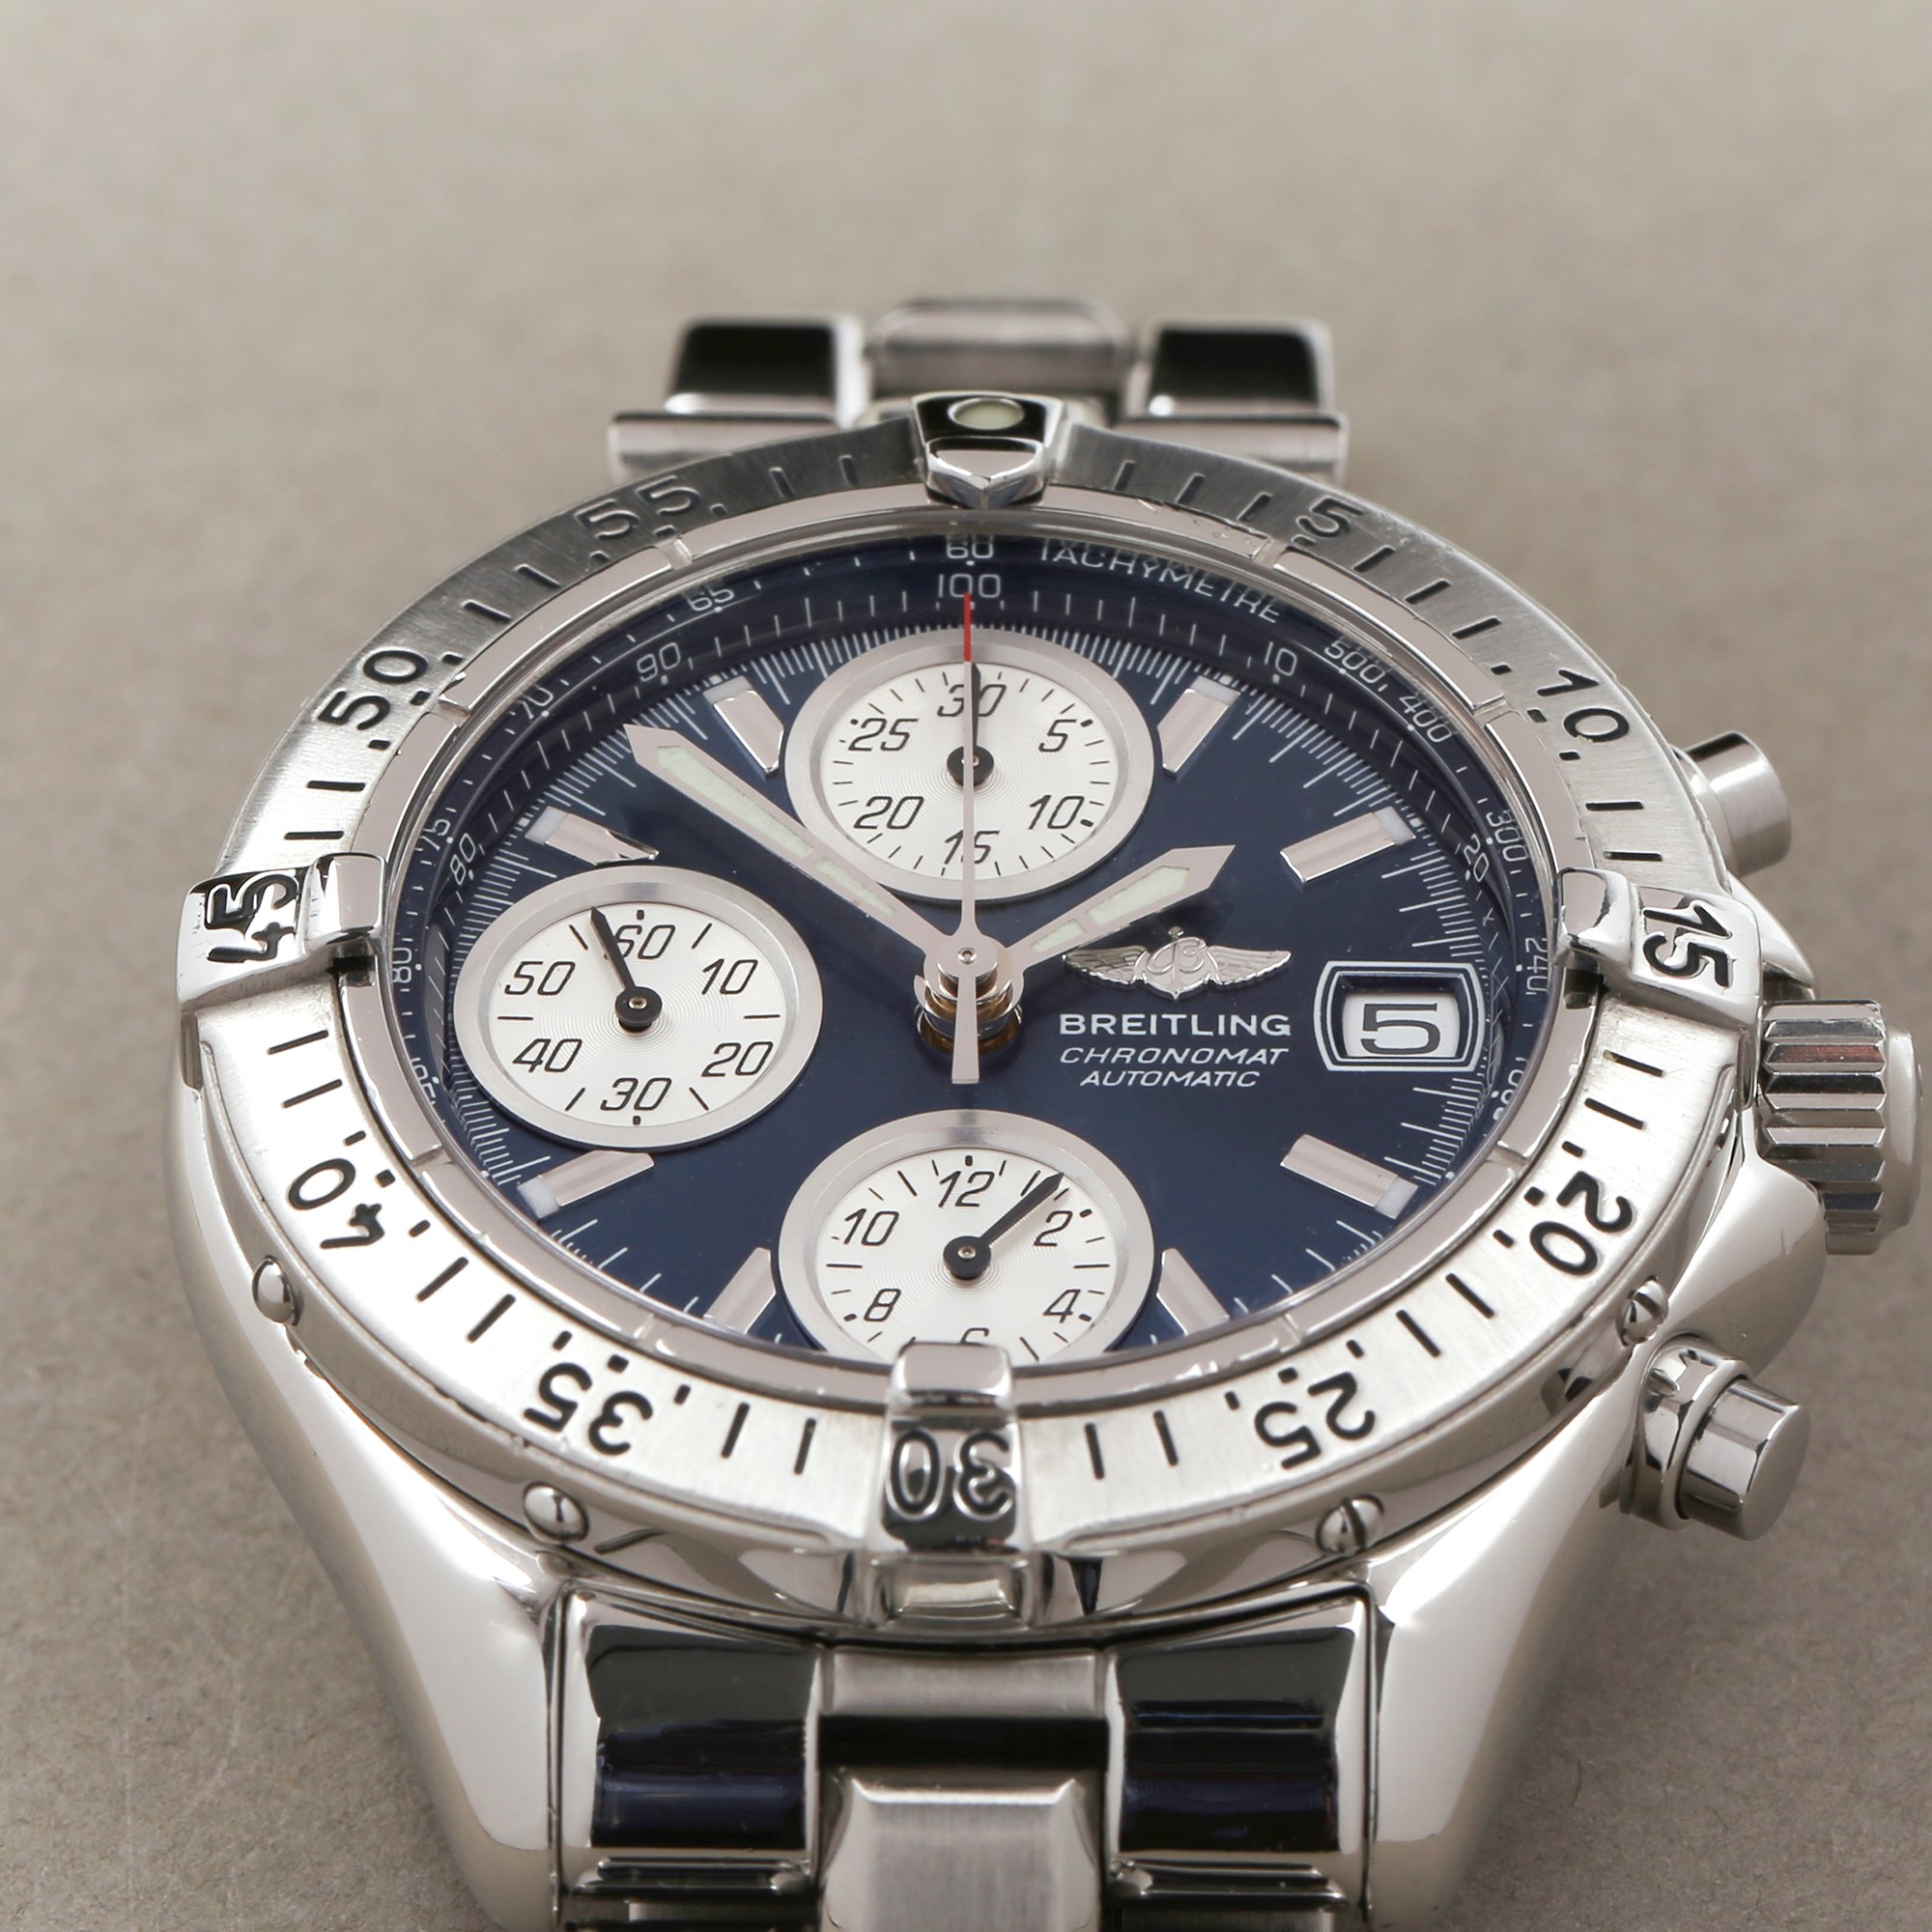 Breitling Chronomat Chronograph Roestvrij Staal A13335